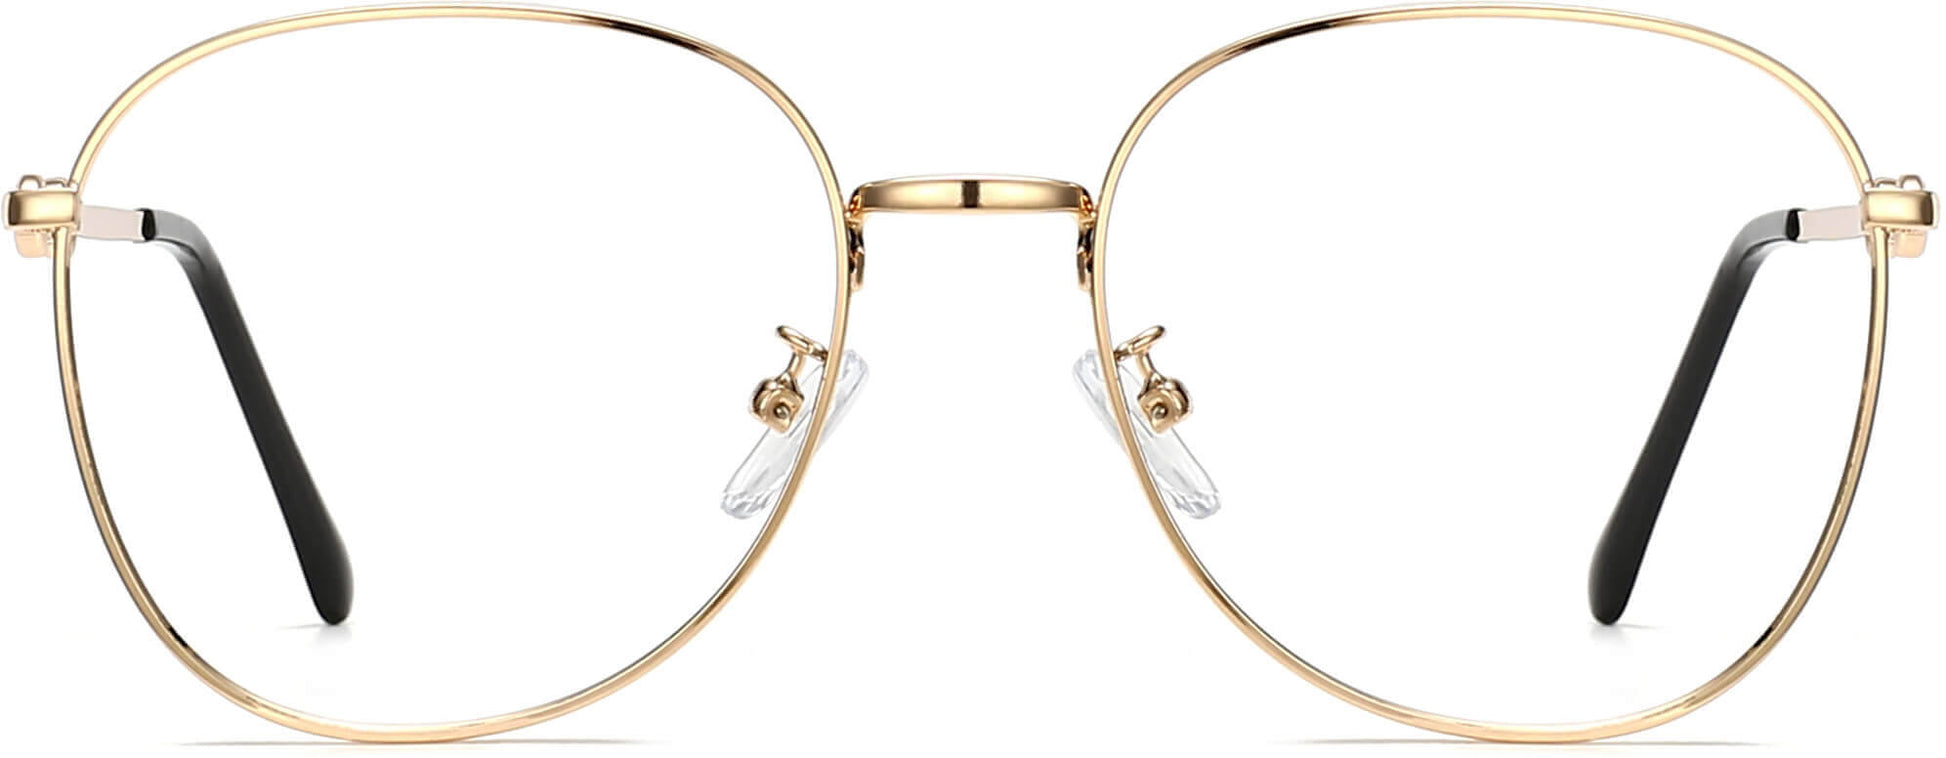 Kalani Aviator Gold Eyeglasses from ANRRI, front view